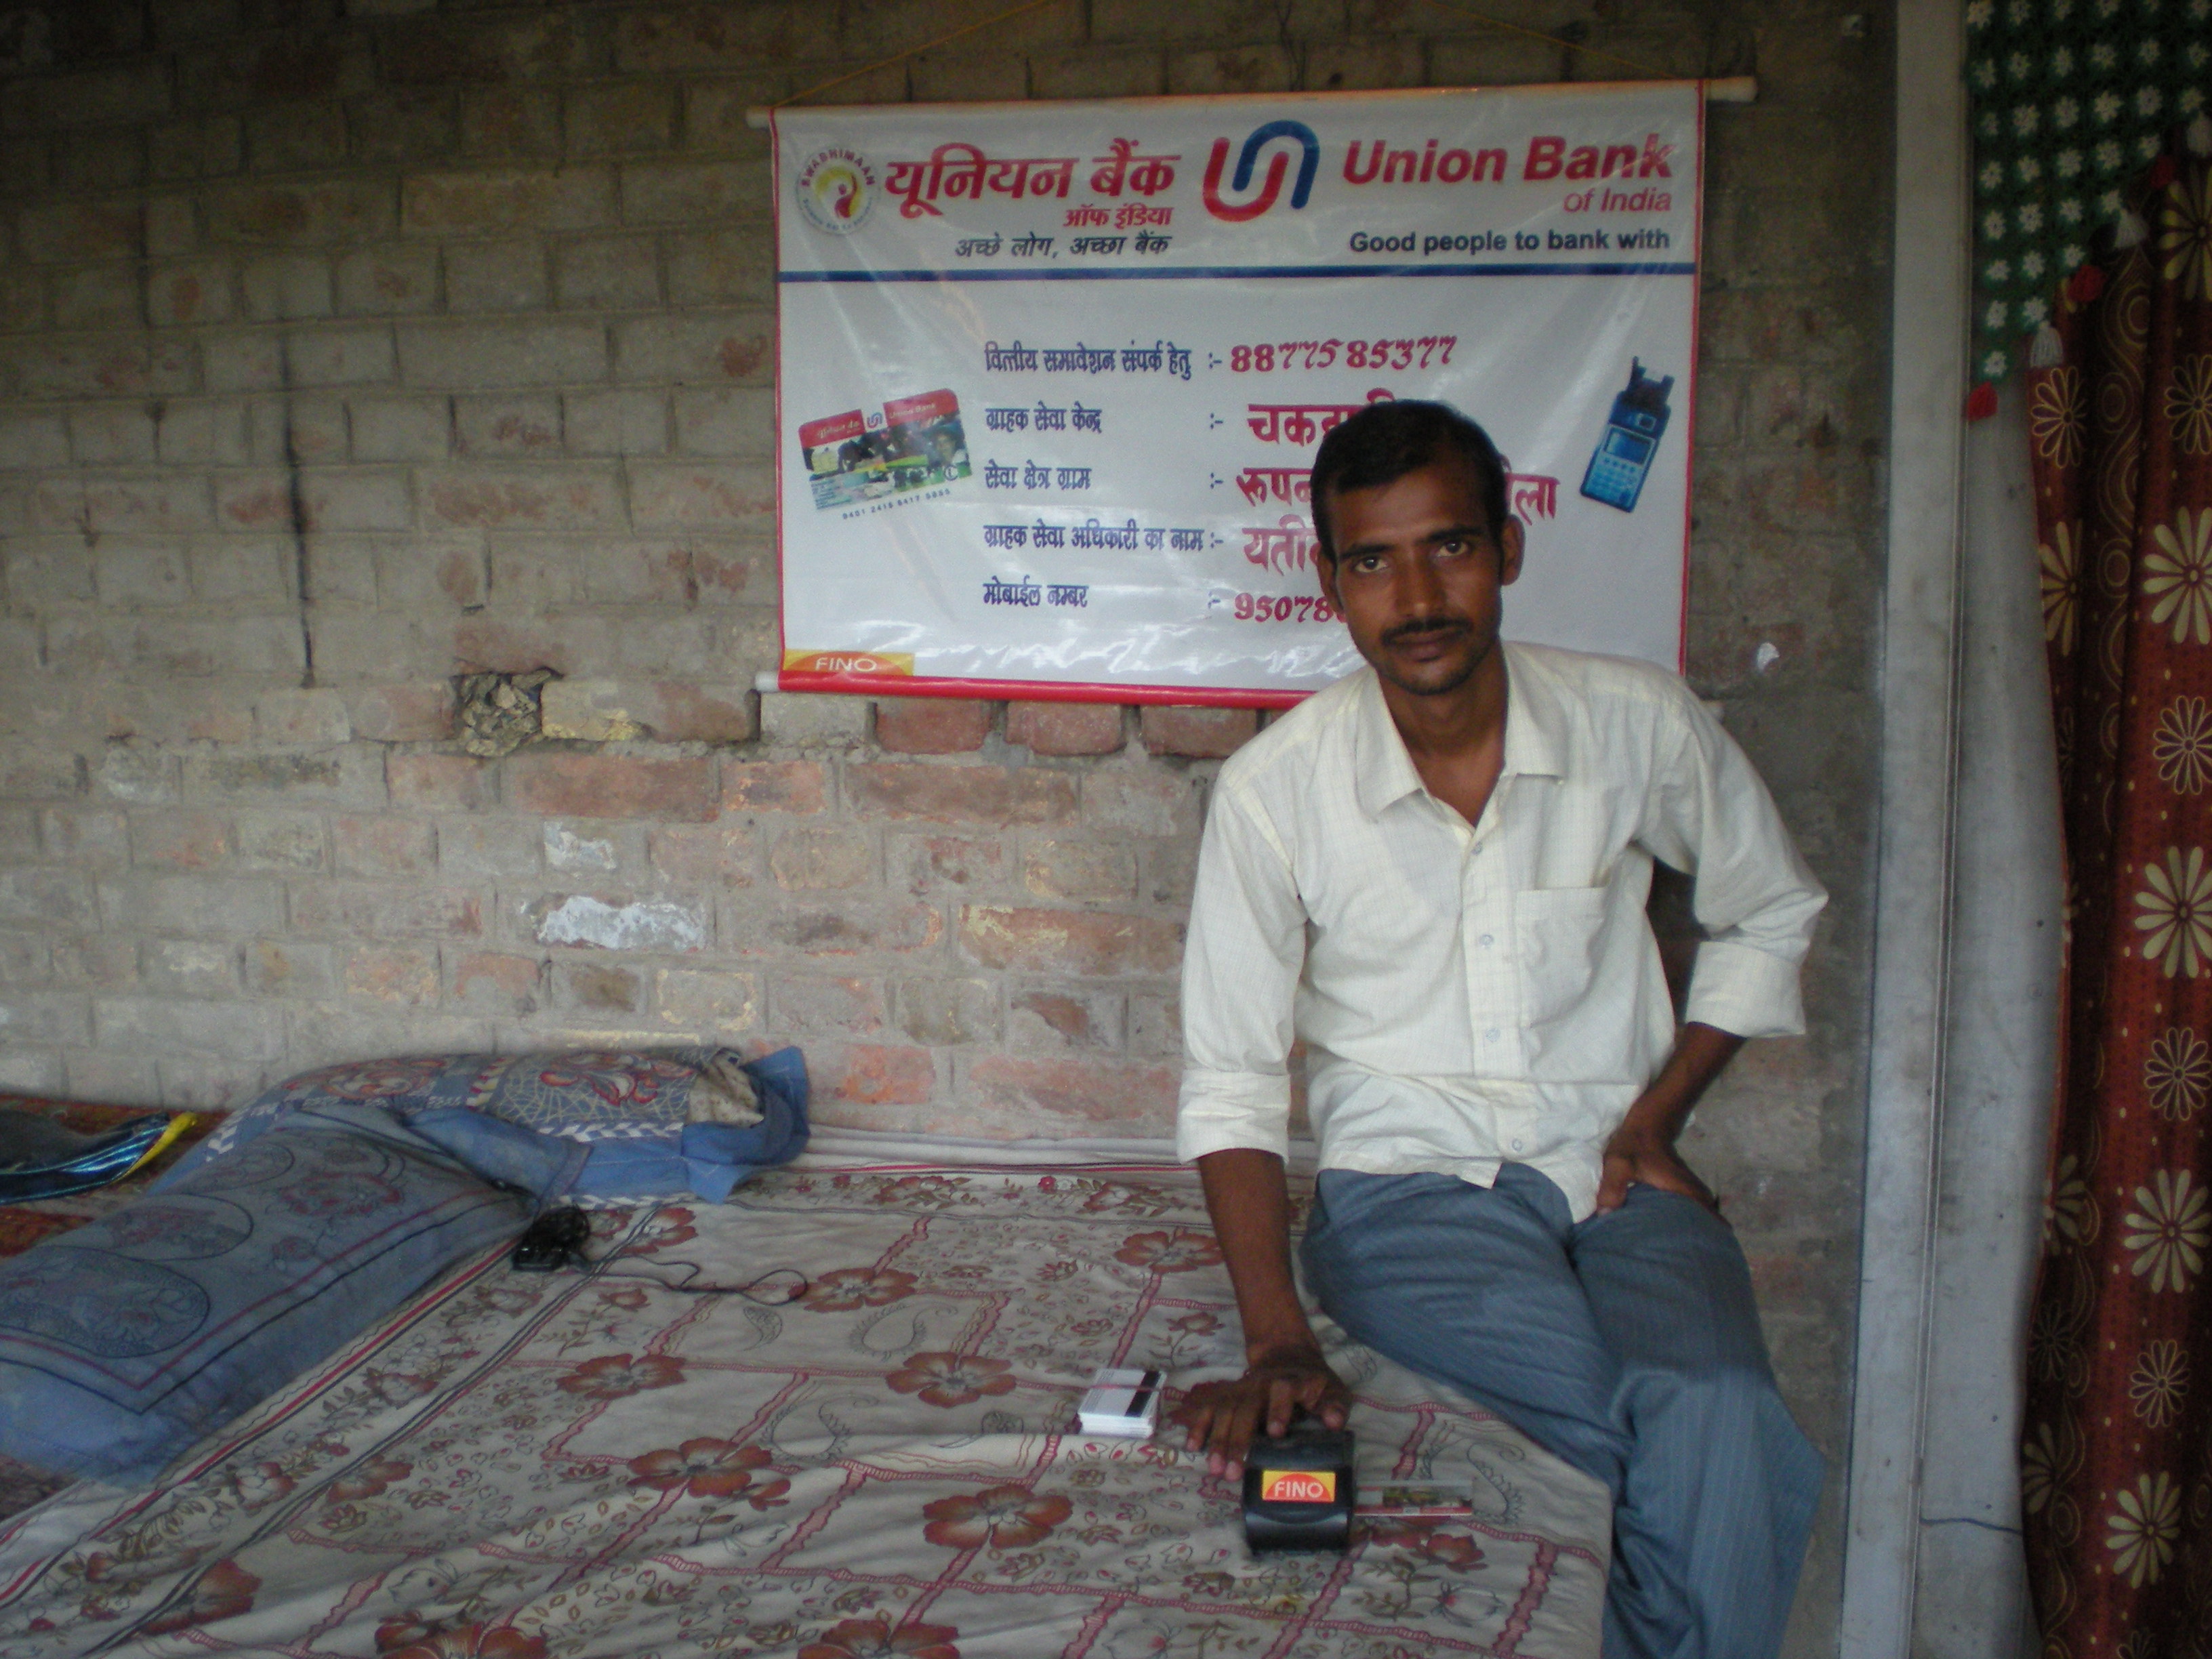 Having personally gained from CTLC services, Yatin Kumar is eager to spread the word about the importance of computer skills to villagers